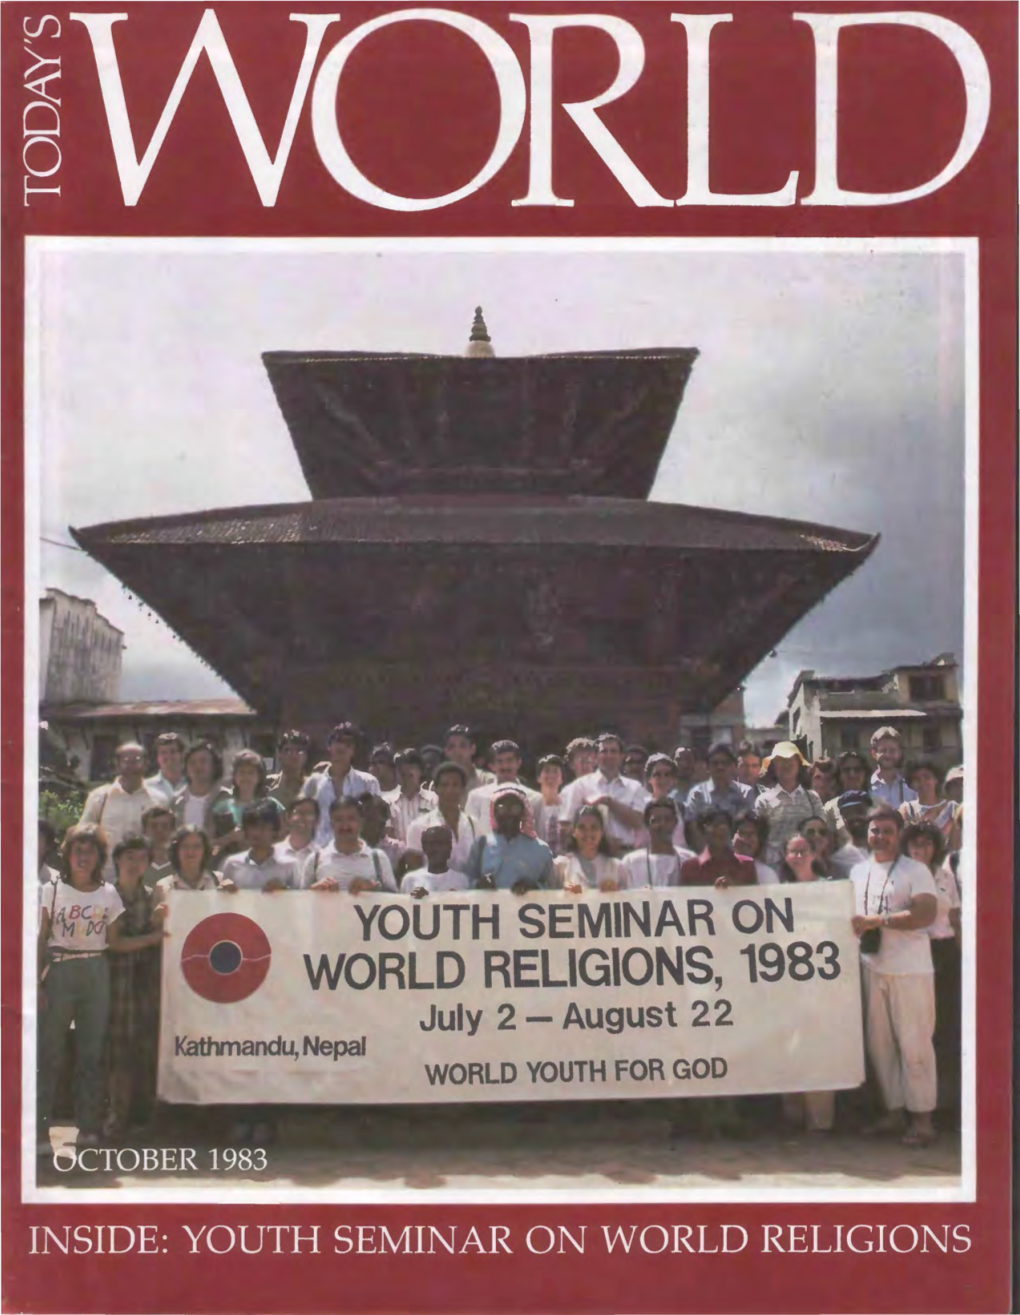 WORLD RELIGIONS, 1983 July 2 - August 2 2 WORLD YOUTH for GOD I